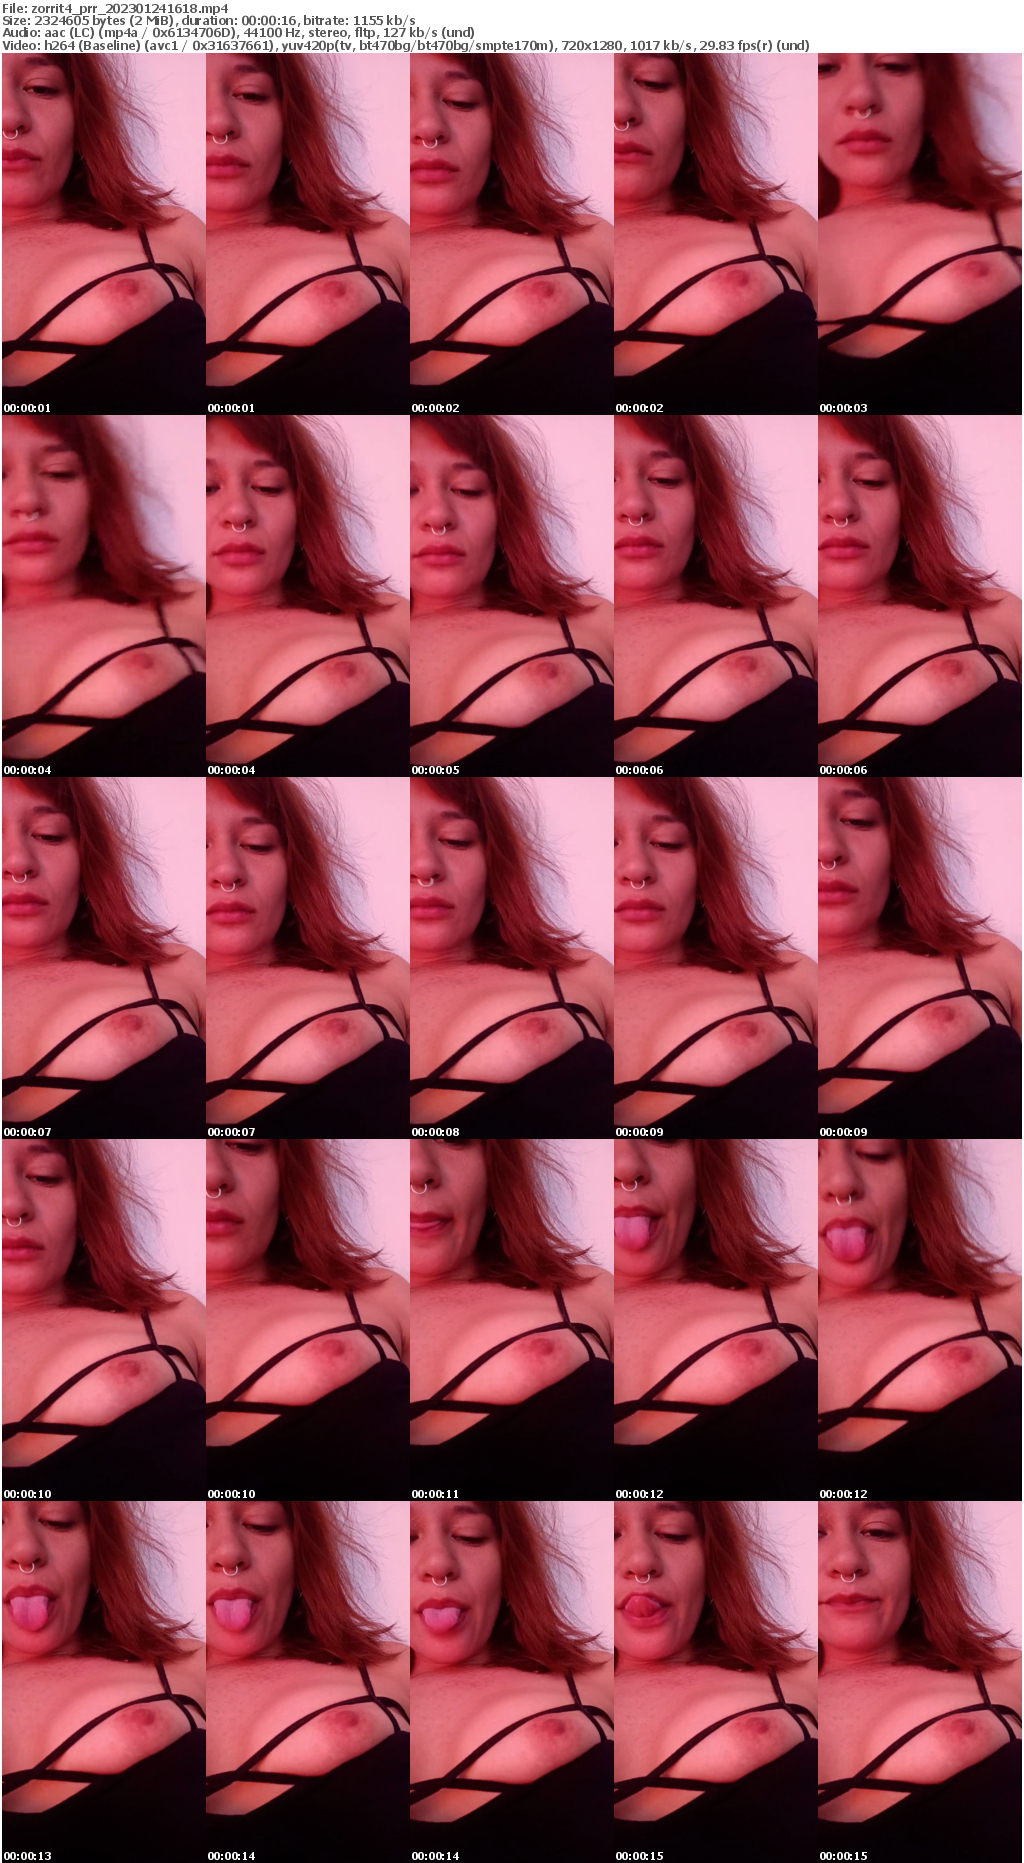 Preview thumb from zorrit4_prr on 2023-01-24 @ cam4